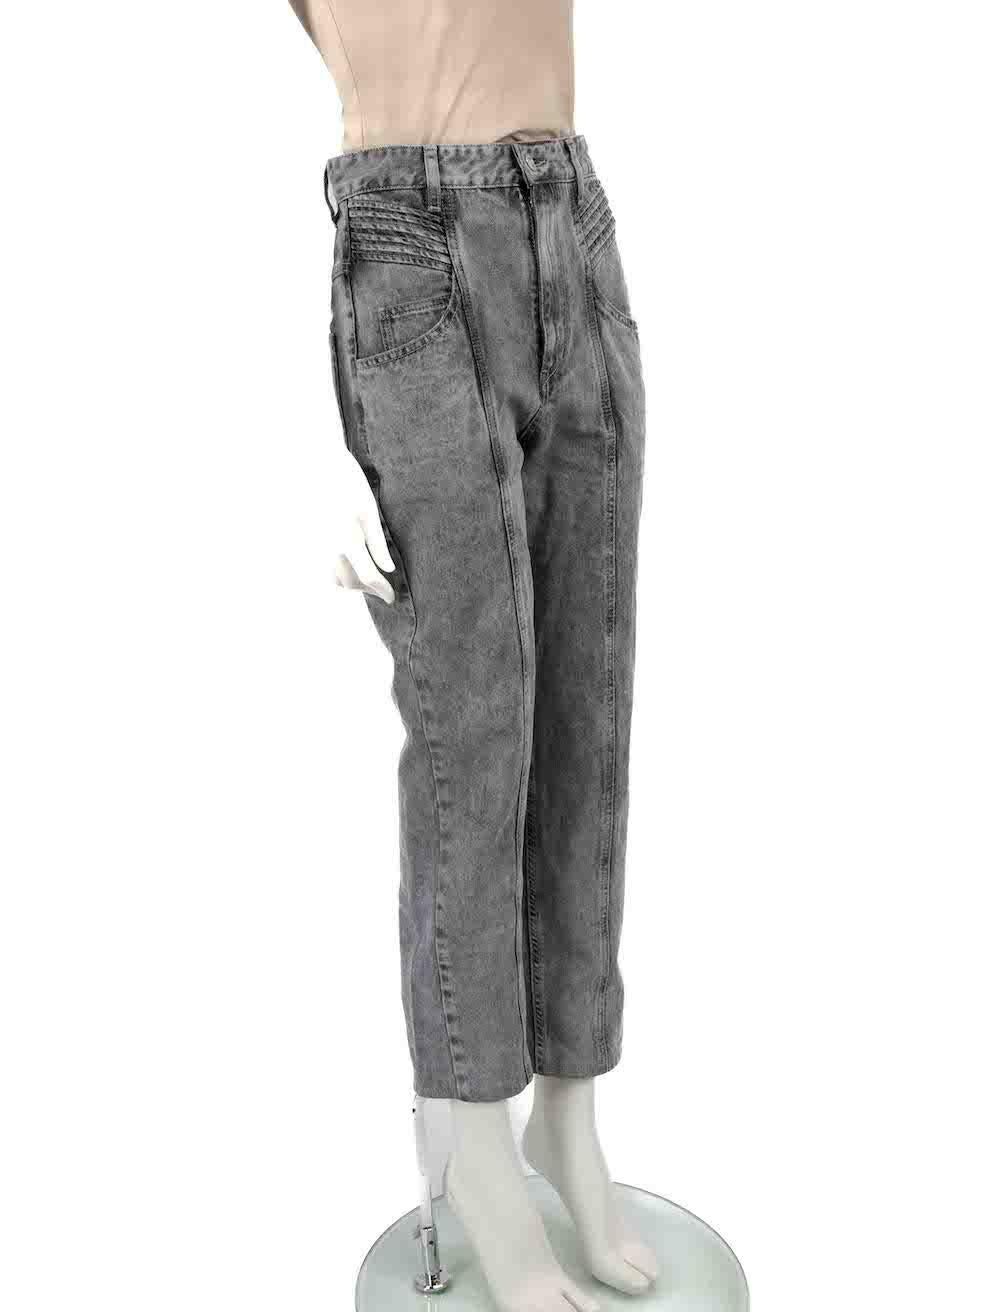 CONDITION is Very good. Minimal wear to trousers is evident. Minimal wear to discolouration mark to the rear hip area on this used Isabel Marant Étoile designer resale item.

Details
Grey
Denim
Jeans
High rise
Straight leg
3x Front pockets
2x Back